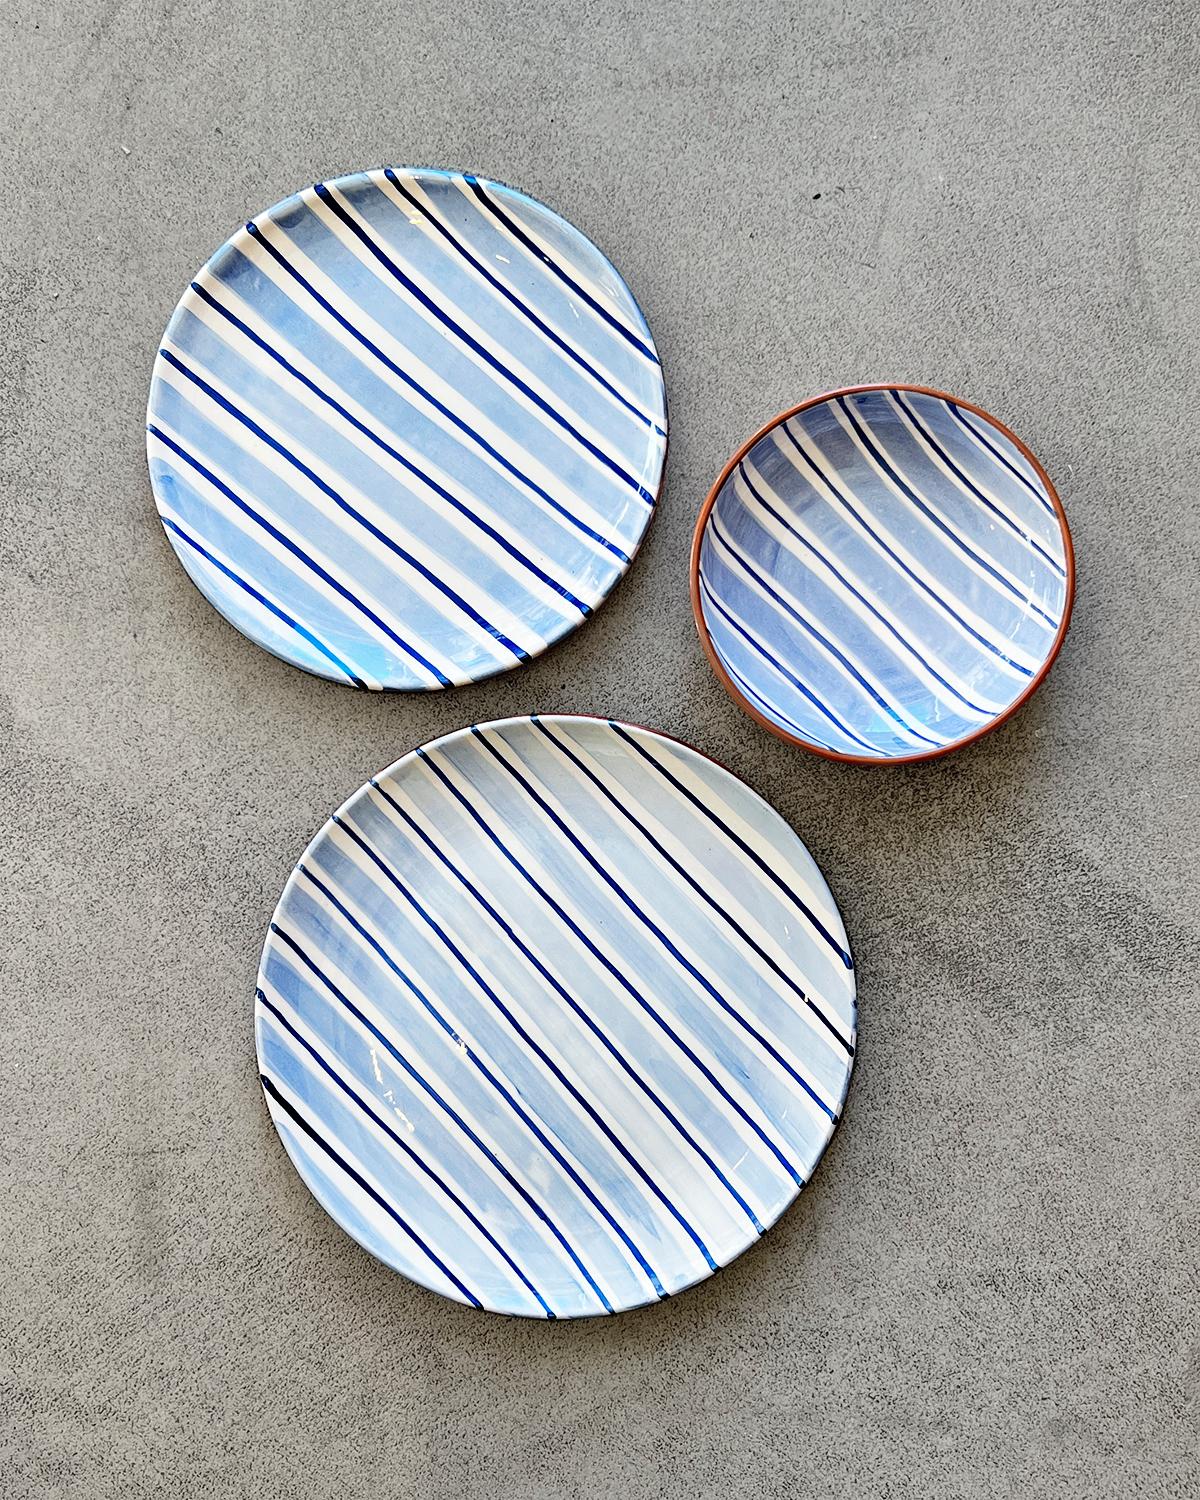 Casa Cubista Cabana Blue Striped Terracotta Dinner Plates In New Condition For Sale In West Hollywood, CA